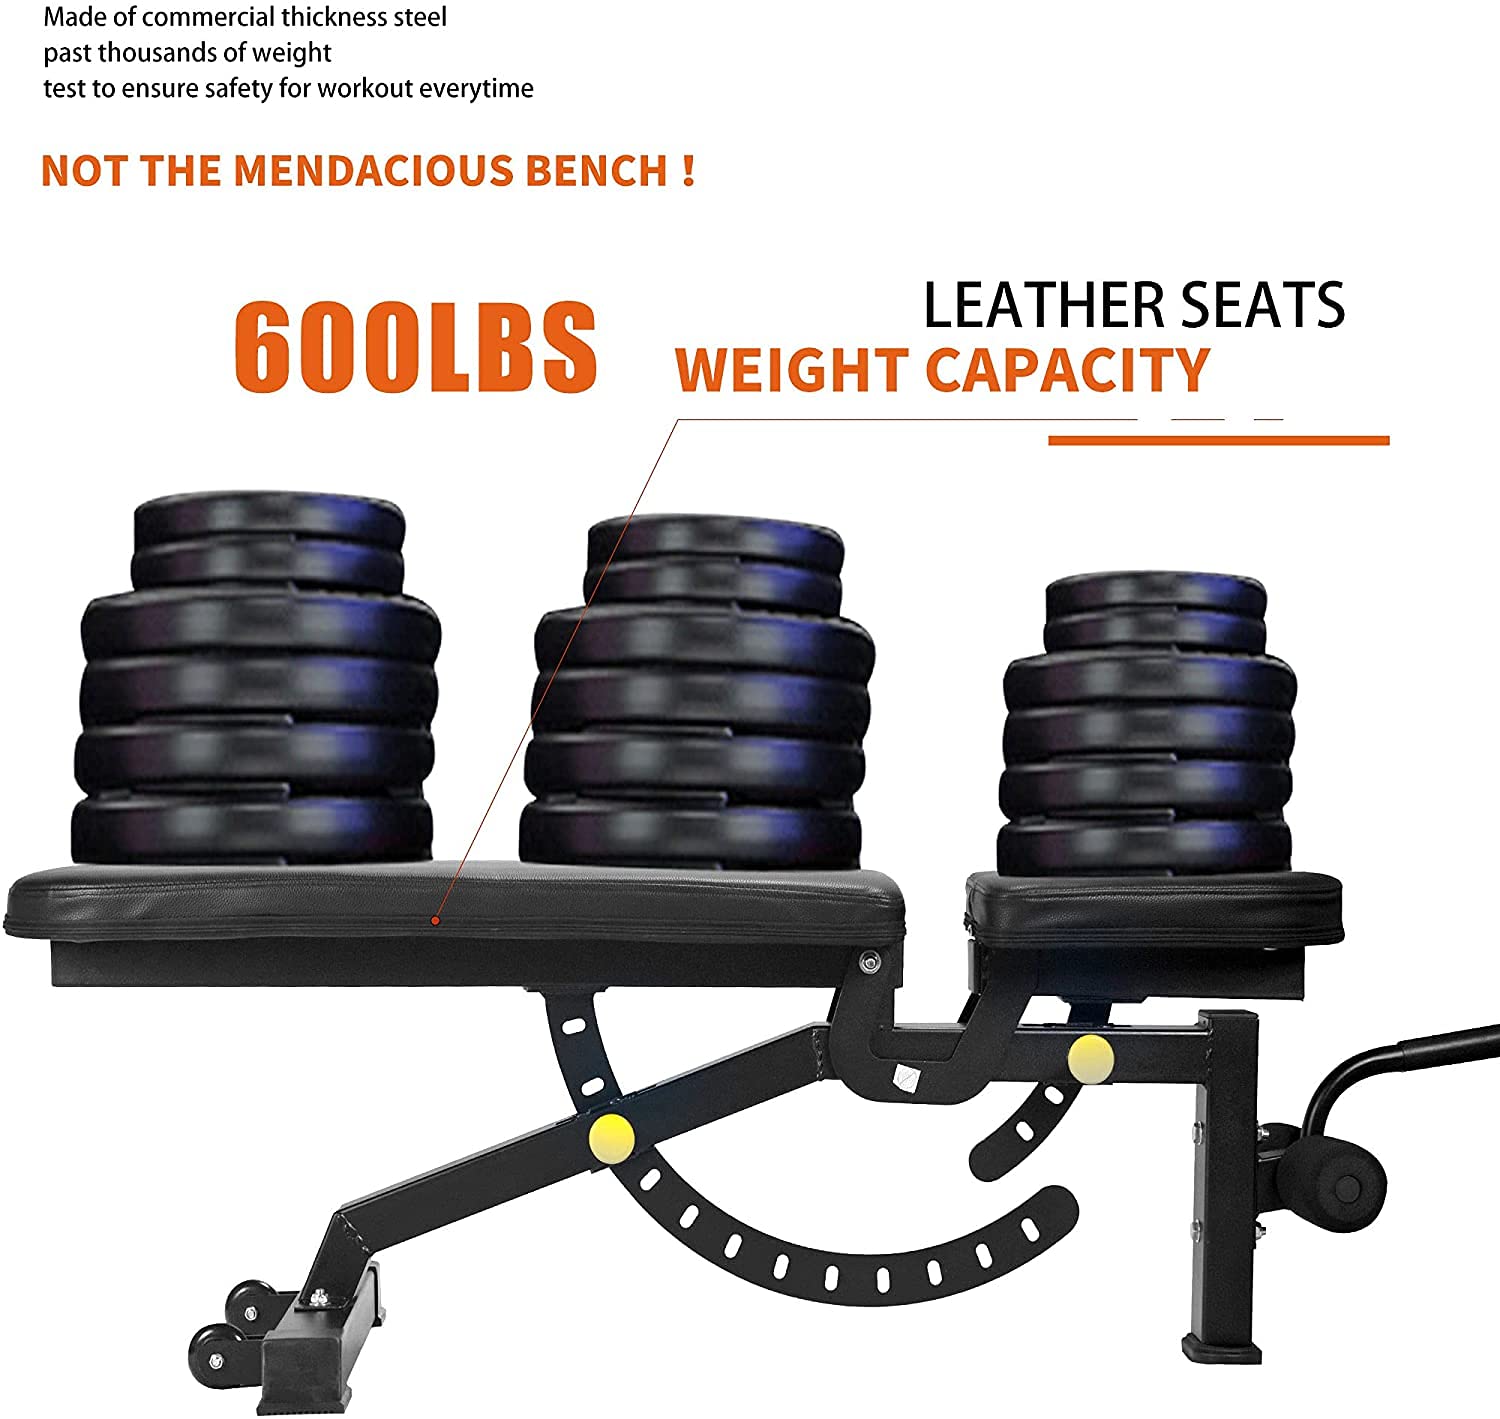 600lbs capacity weight bench